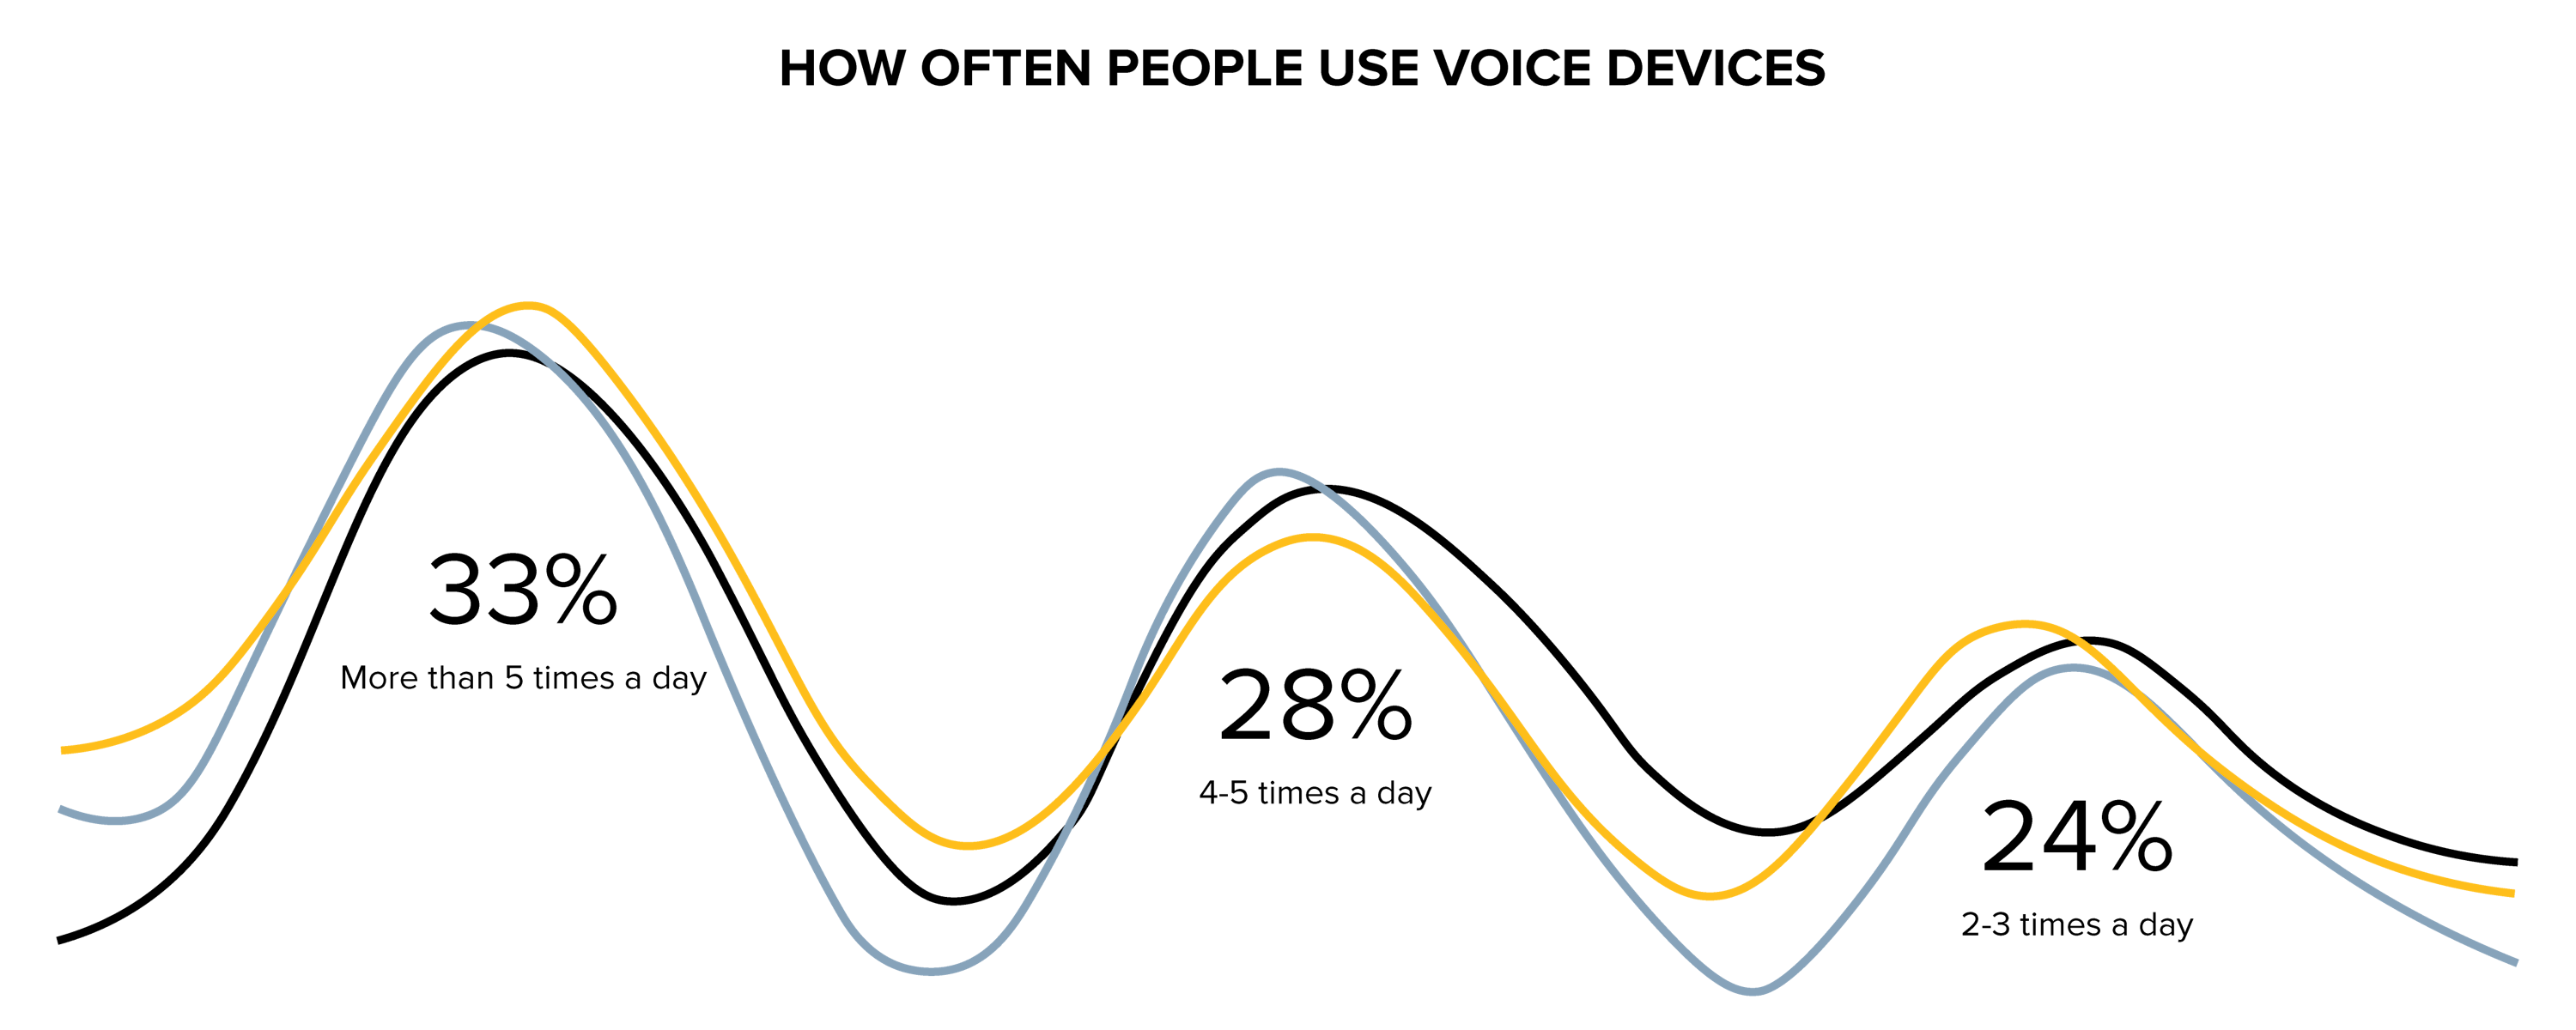 graph of how often people use voice devices